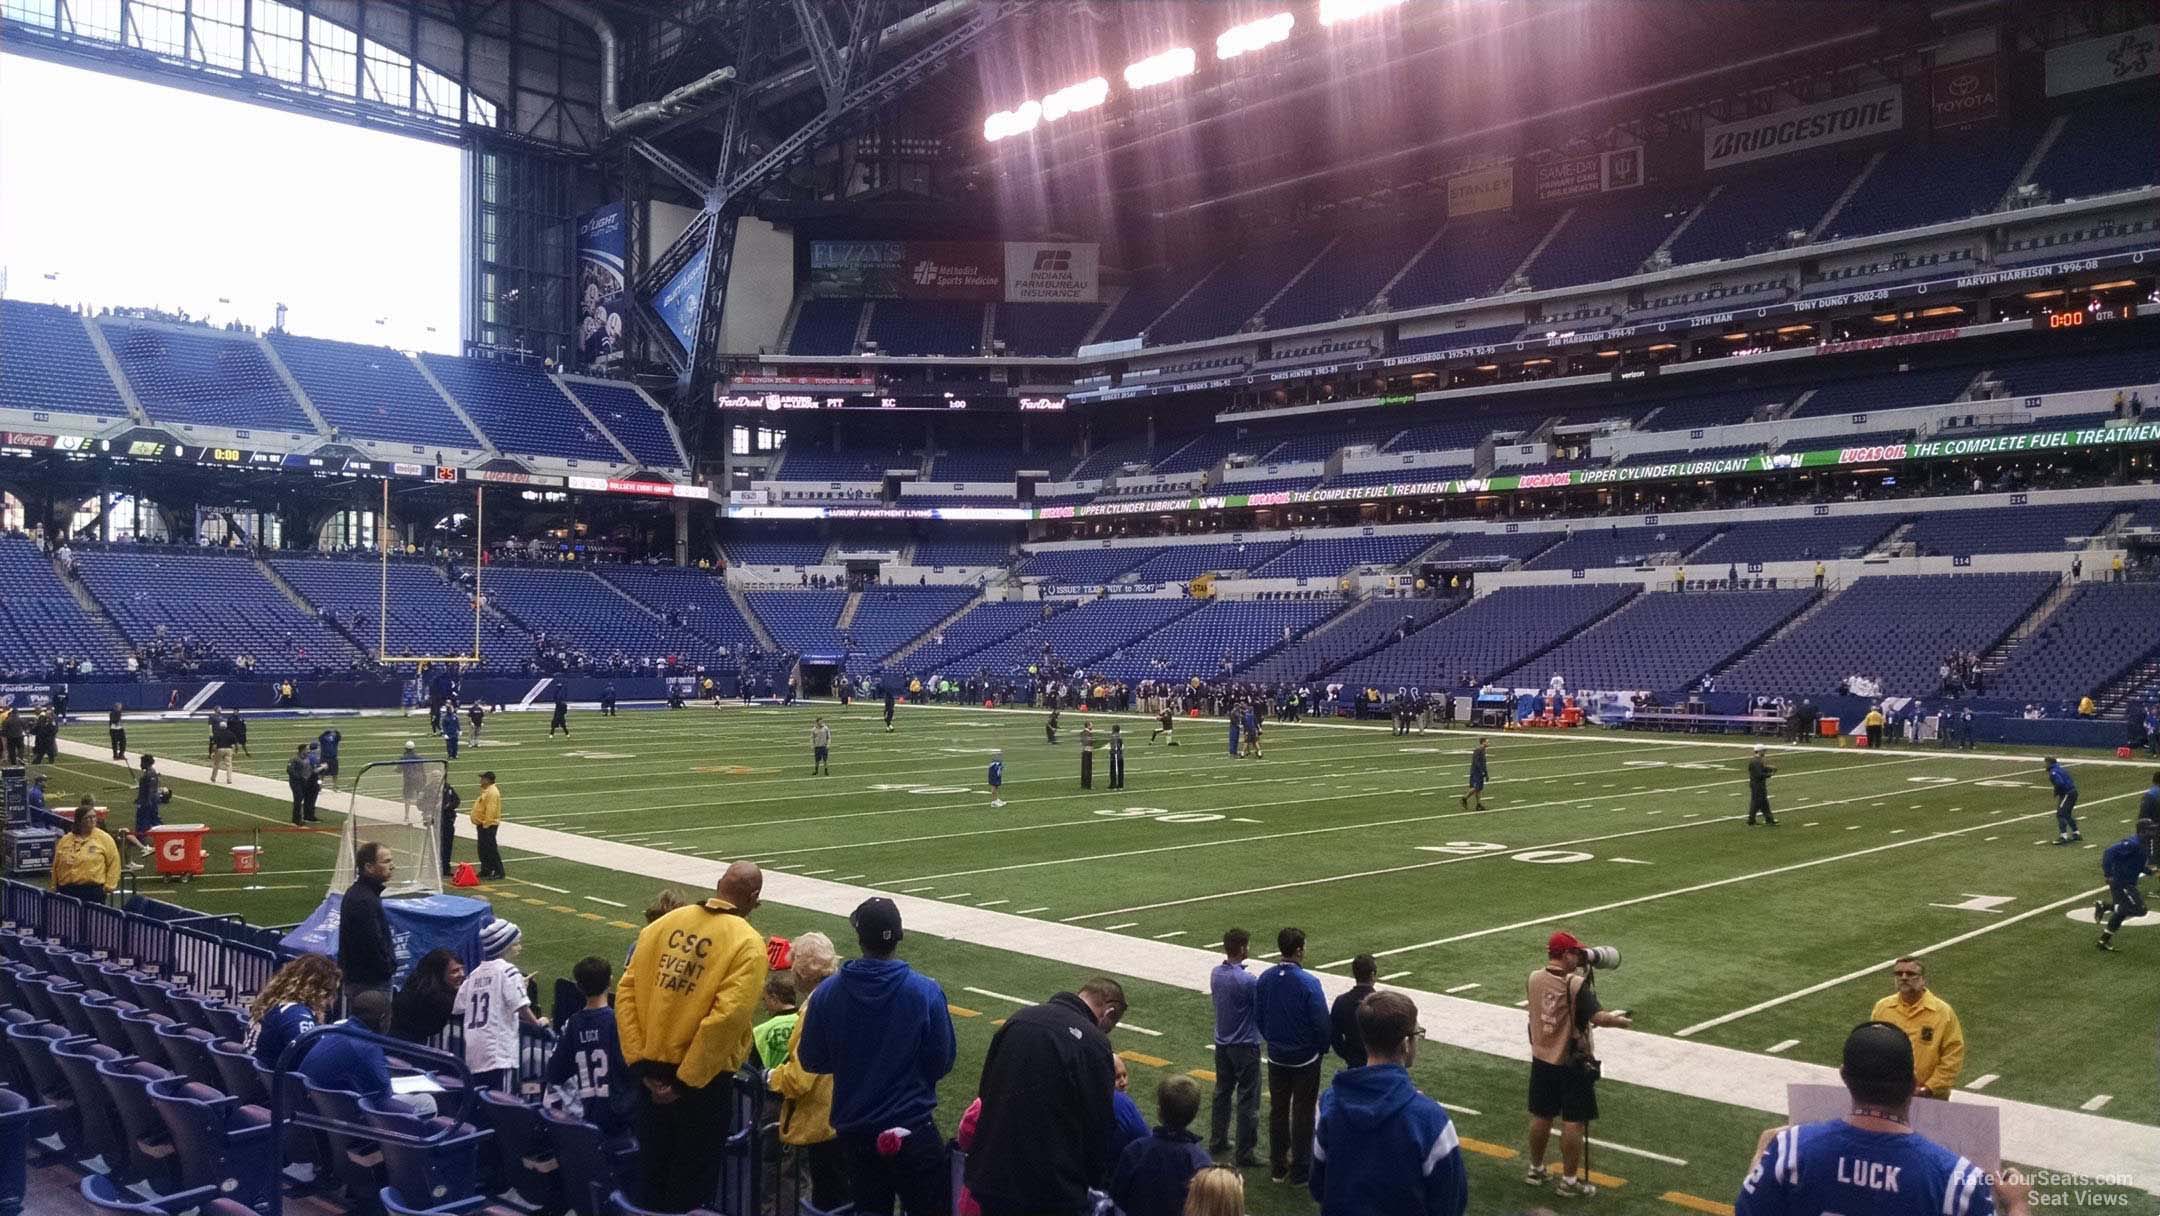 section 136, row 7 seat view  for football - lucas oil stadium